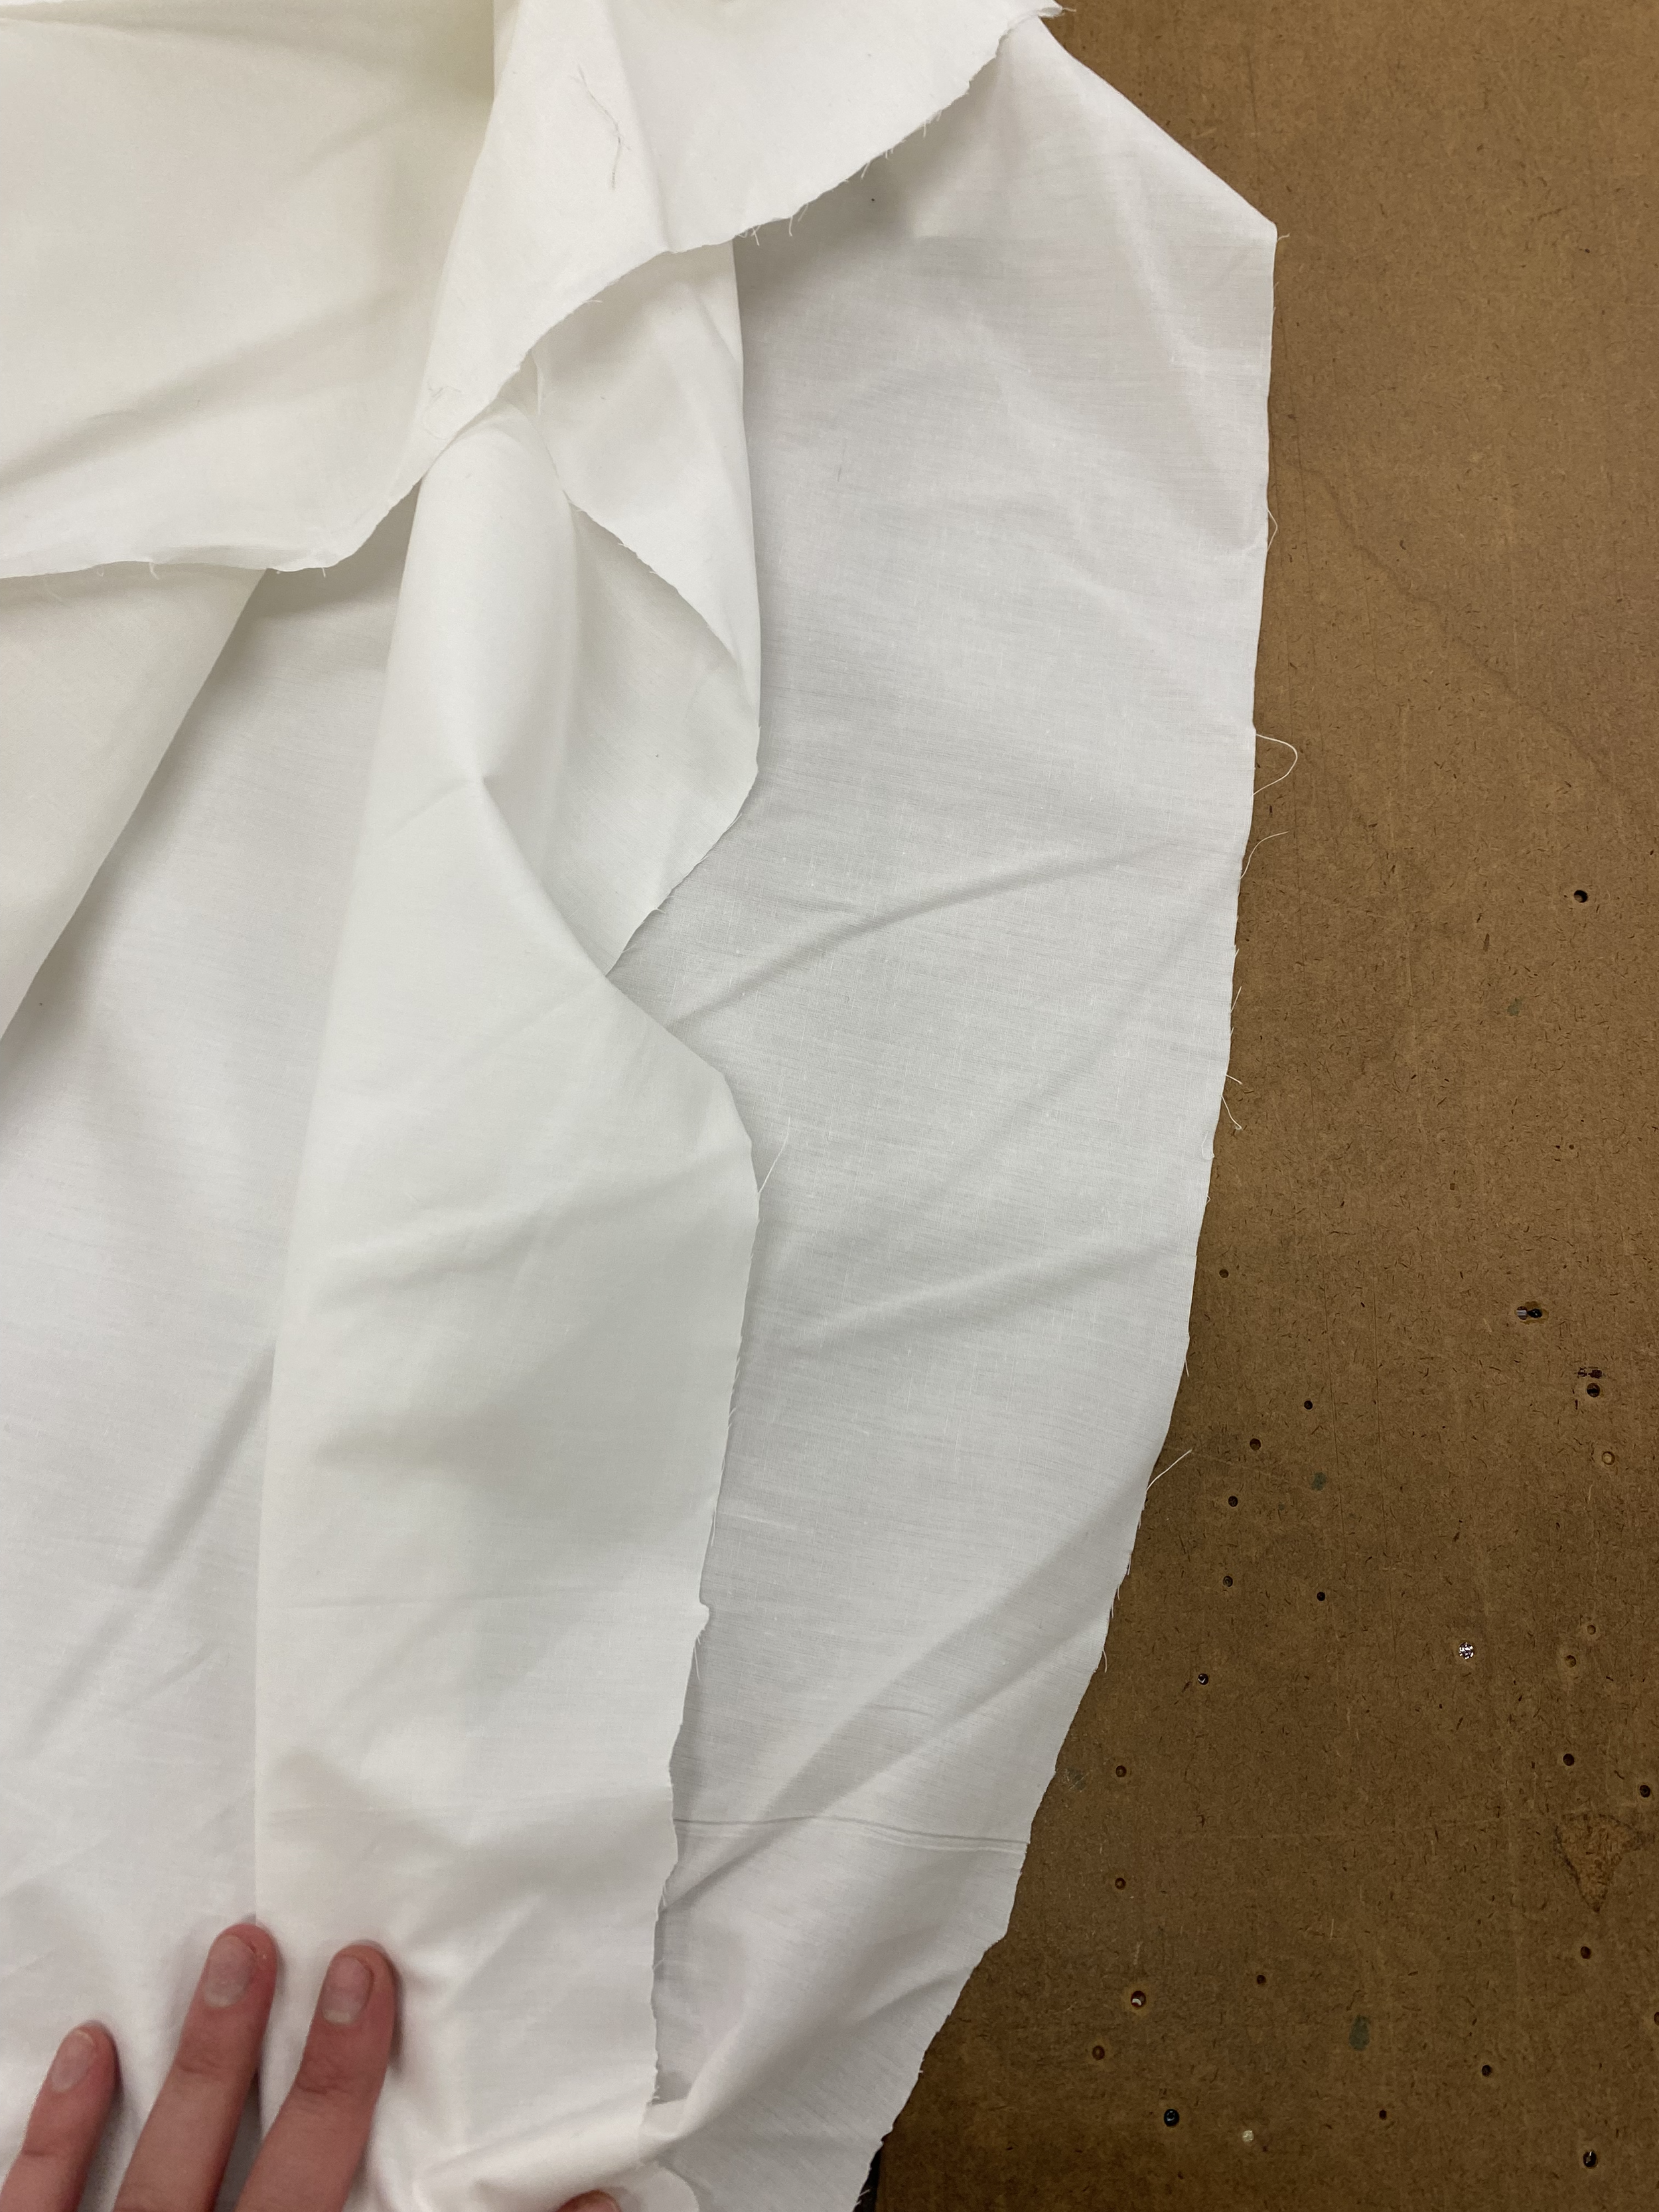 108" Bleached Muslin was chosen for the cube.